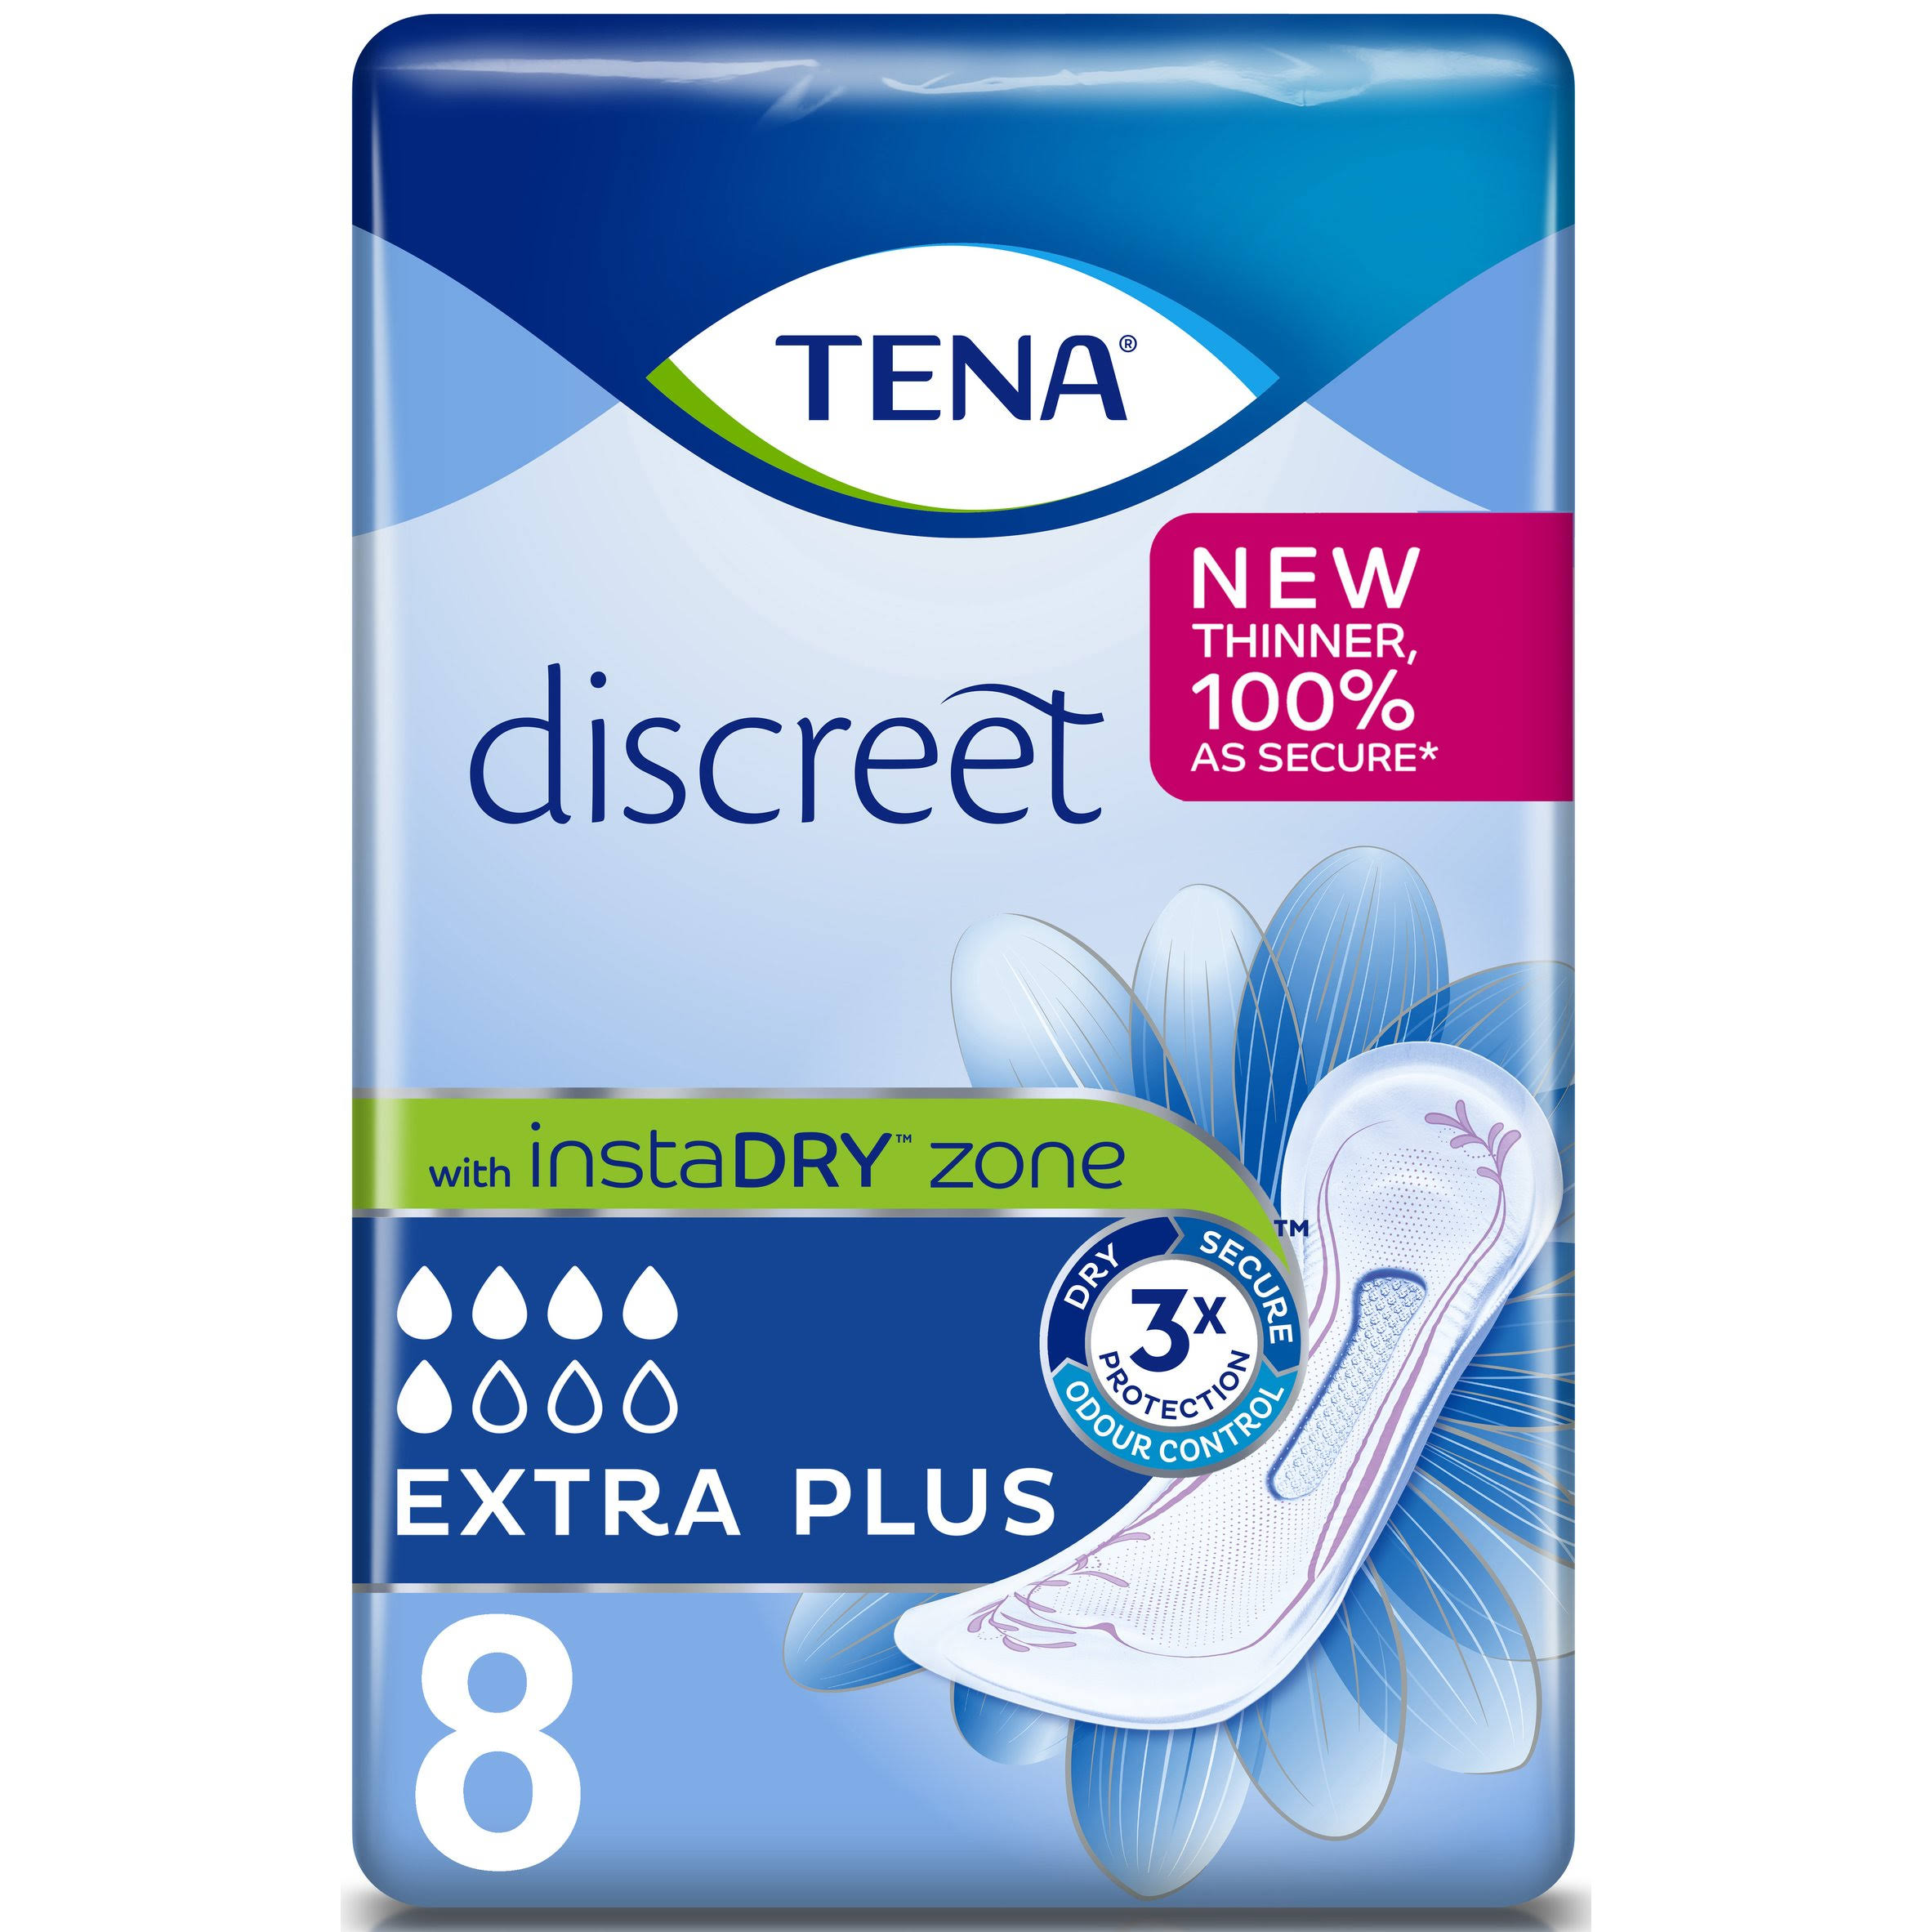 Tena Lady Discreet Extra Plus Incontinence Pads (1 Pack of 8)